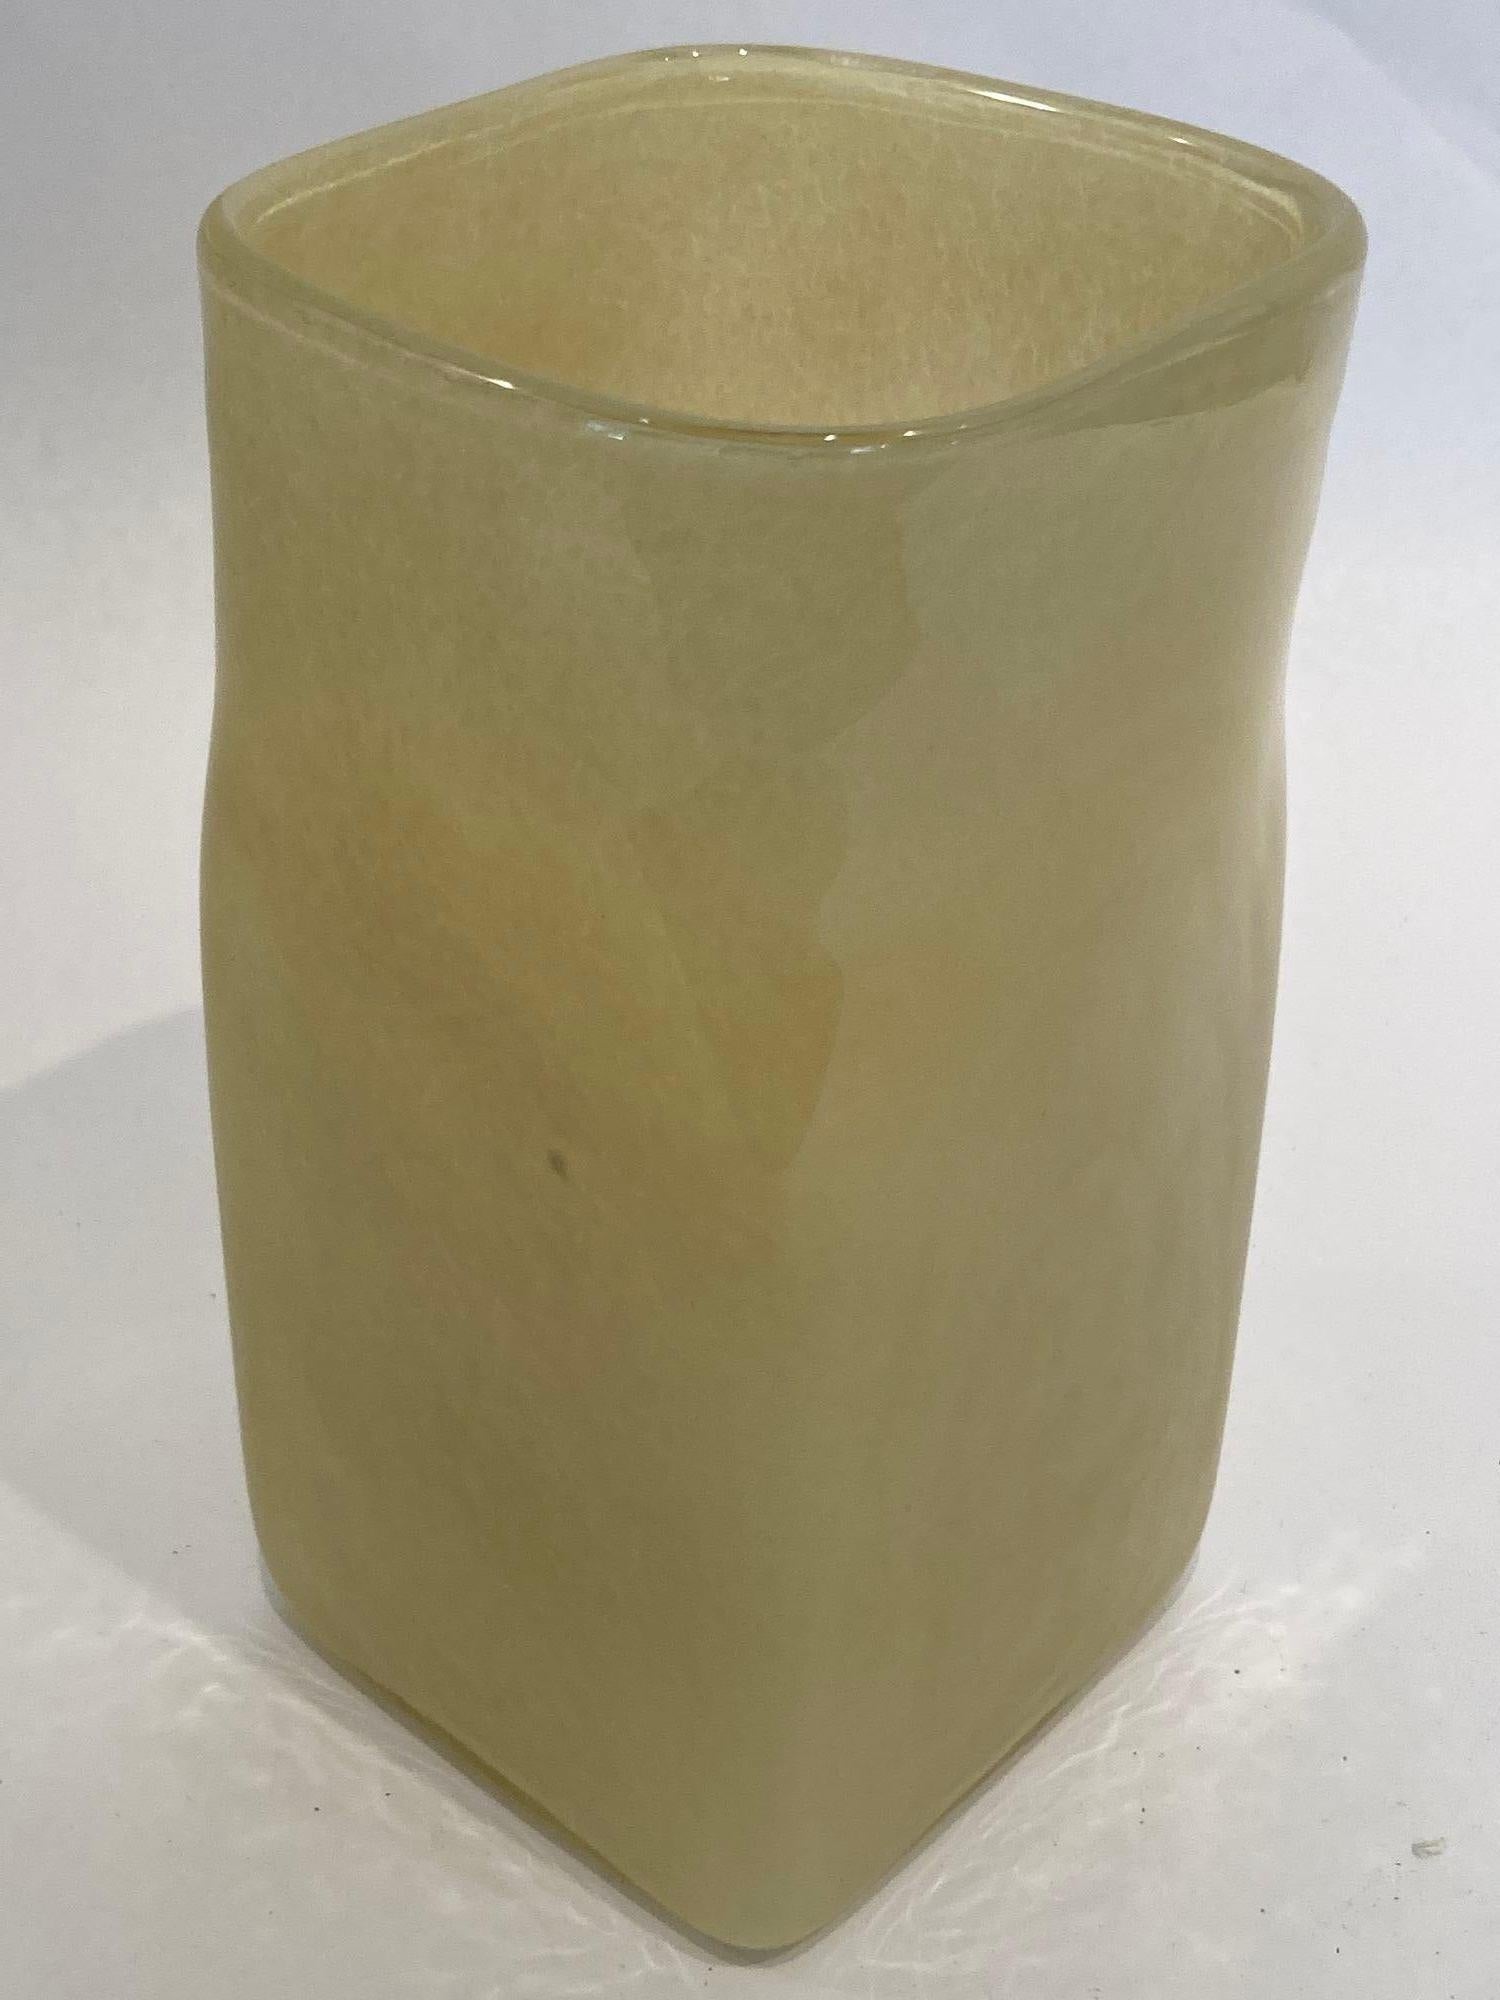 Handcrafted Square Beige Flower Glass Vase Kosta Boda Style, 1980s For Sale 3